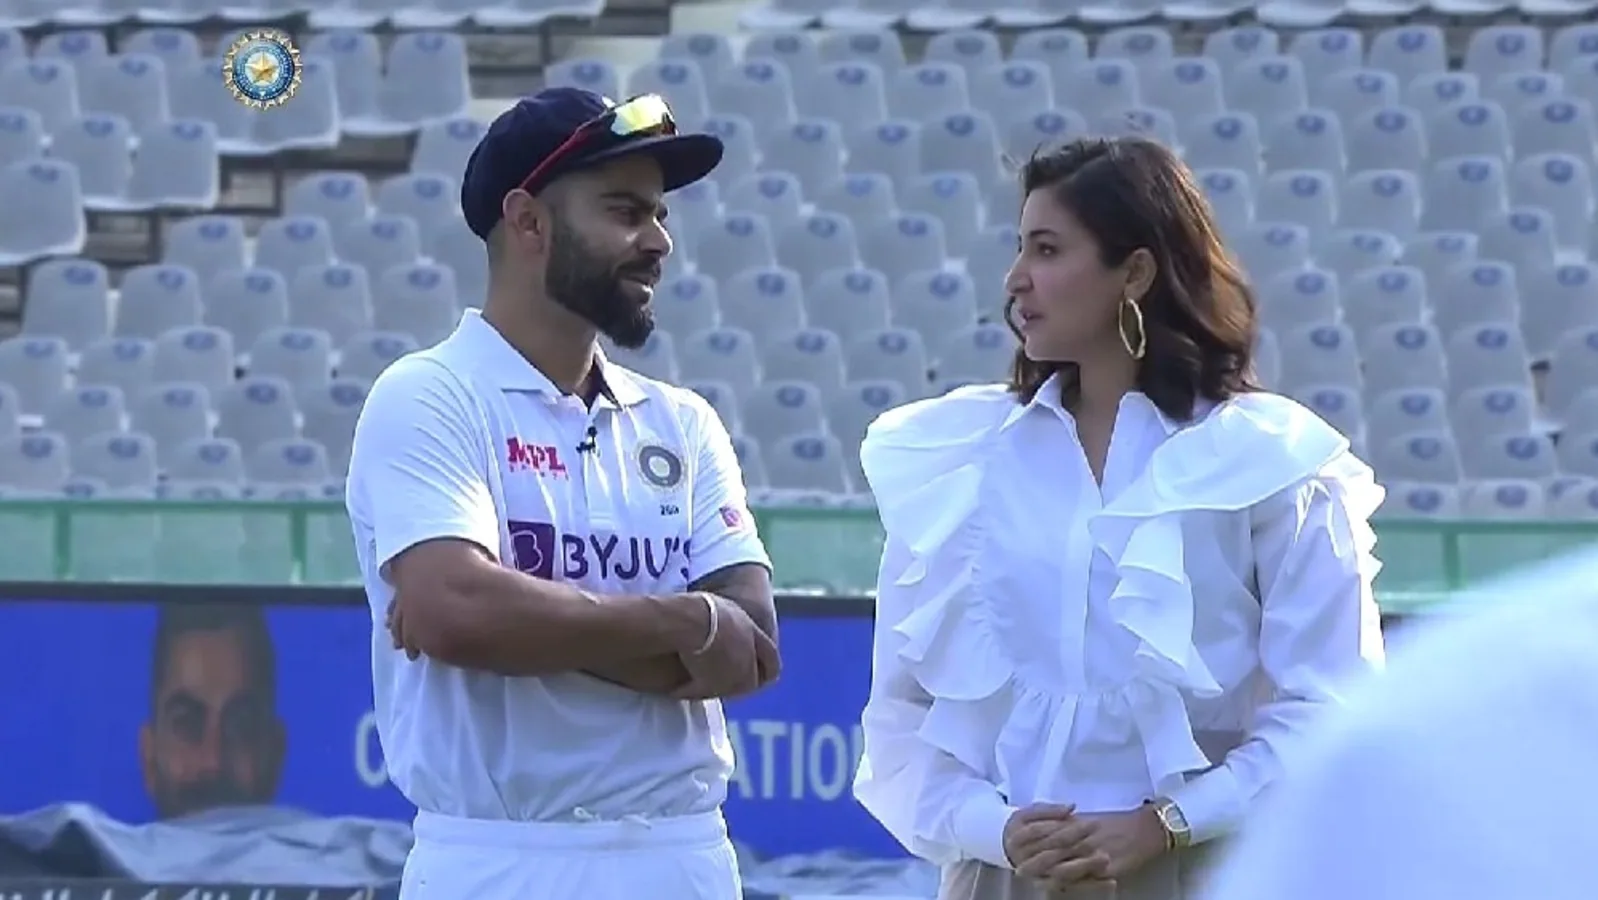 Anushka Sharma joins Virat Kohli on field ahead of his 100th test match, he tells her to hold his cap: Ye le jao please